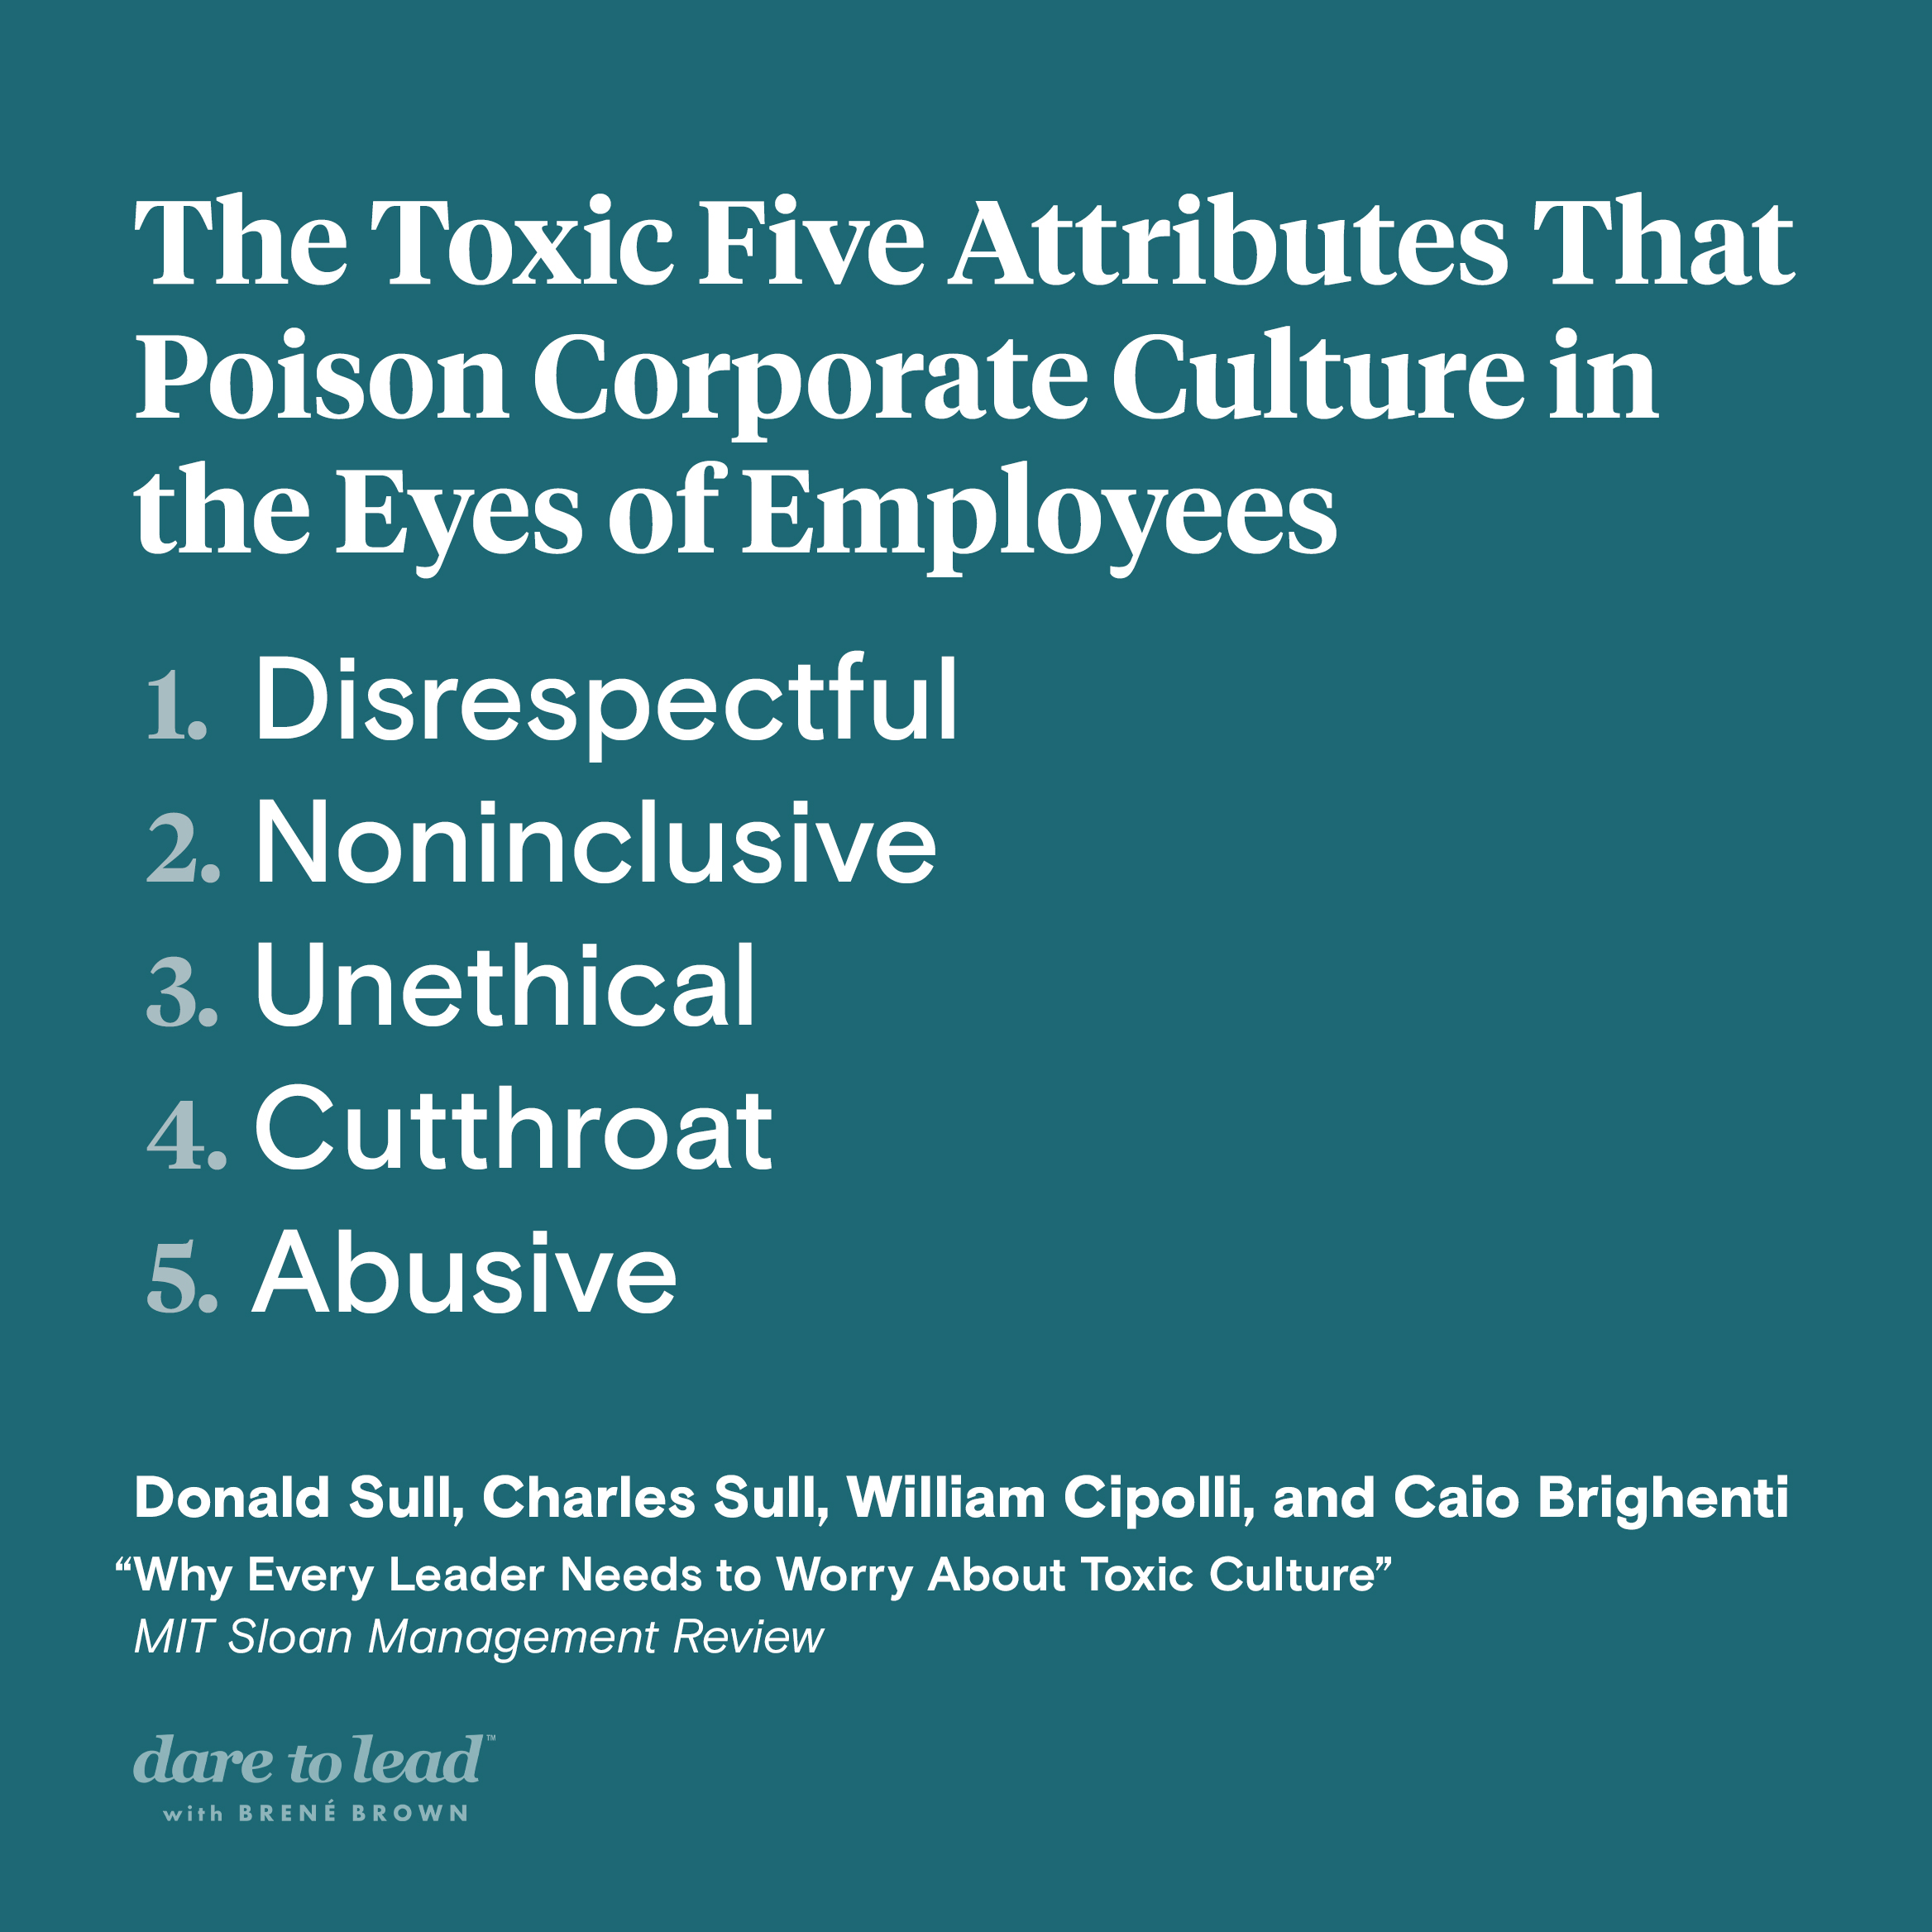 The Toxic Five Attributes That Poison Corporate Culture in the Eyes of Employees: Disrespectful, noninclusive, unethical, cutthroat, and abusive. These attributes appear in an MIT Sloan Management Review article titled Why Every Leader Needs to Worry About Toxic Culture, by Donald Sull, Charles Sull, William Cipolli, and Caio Brighenti.